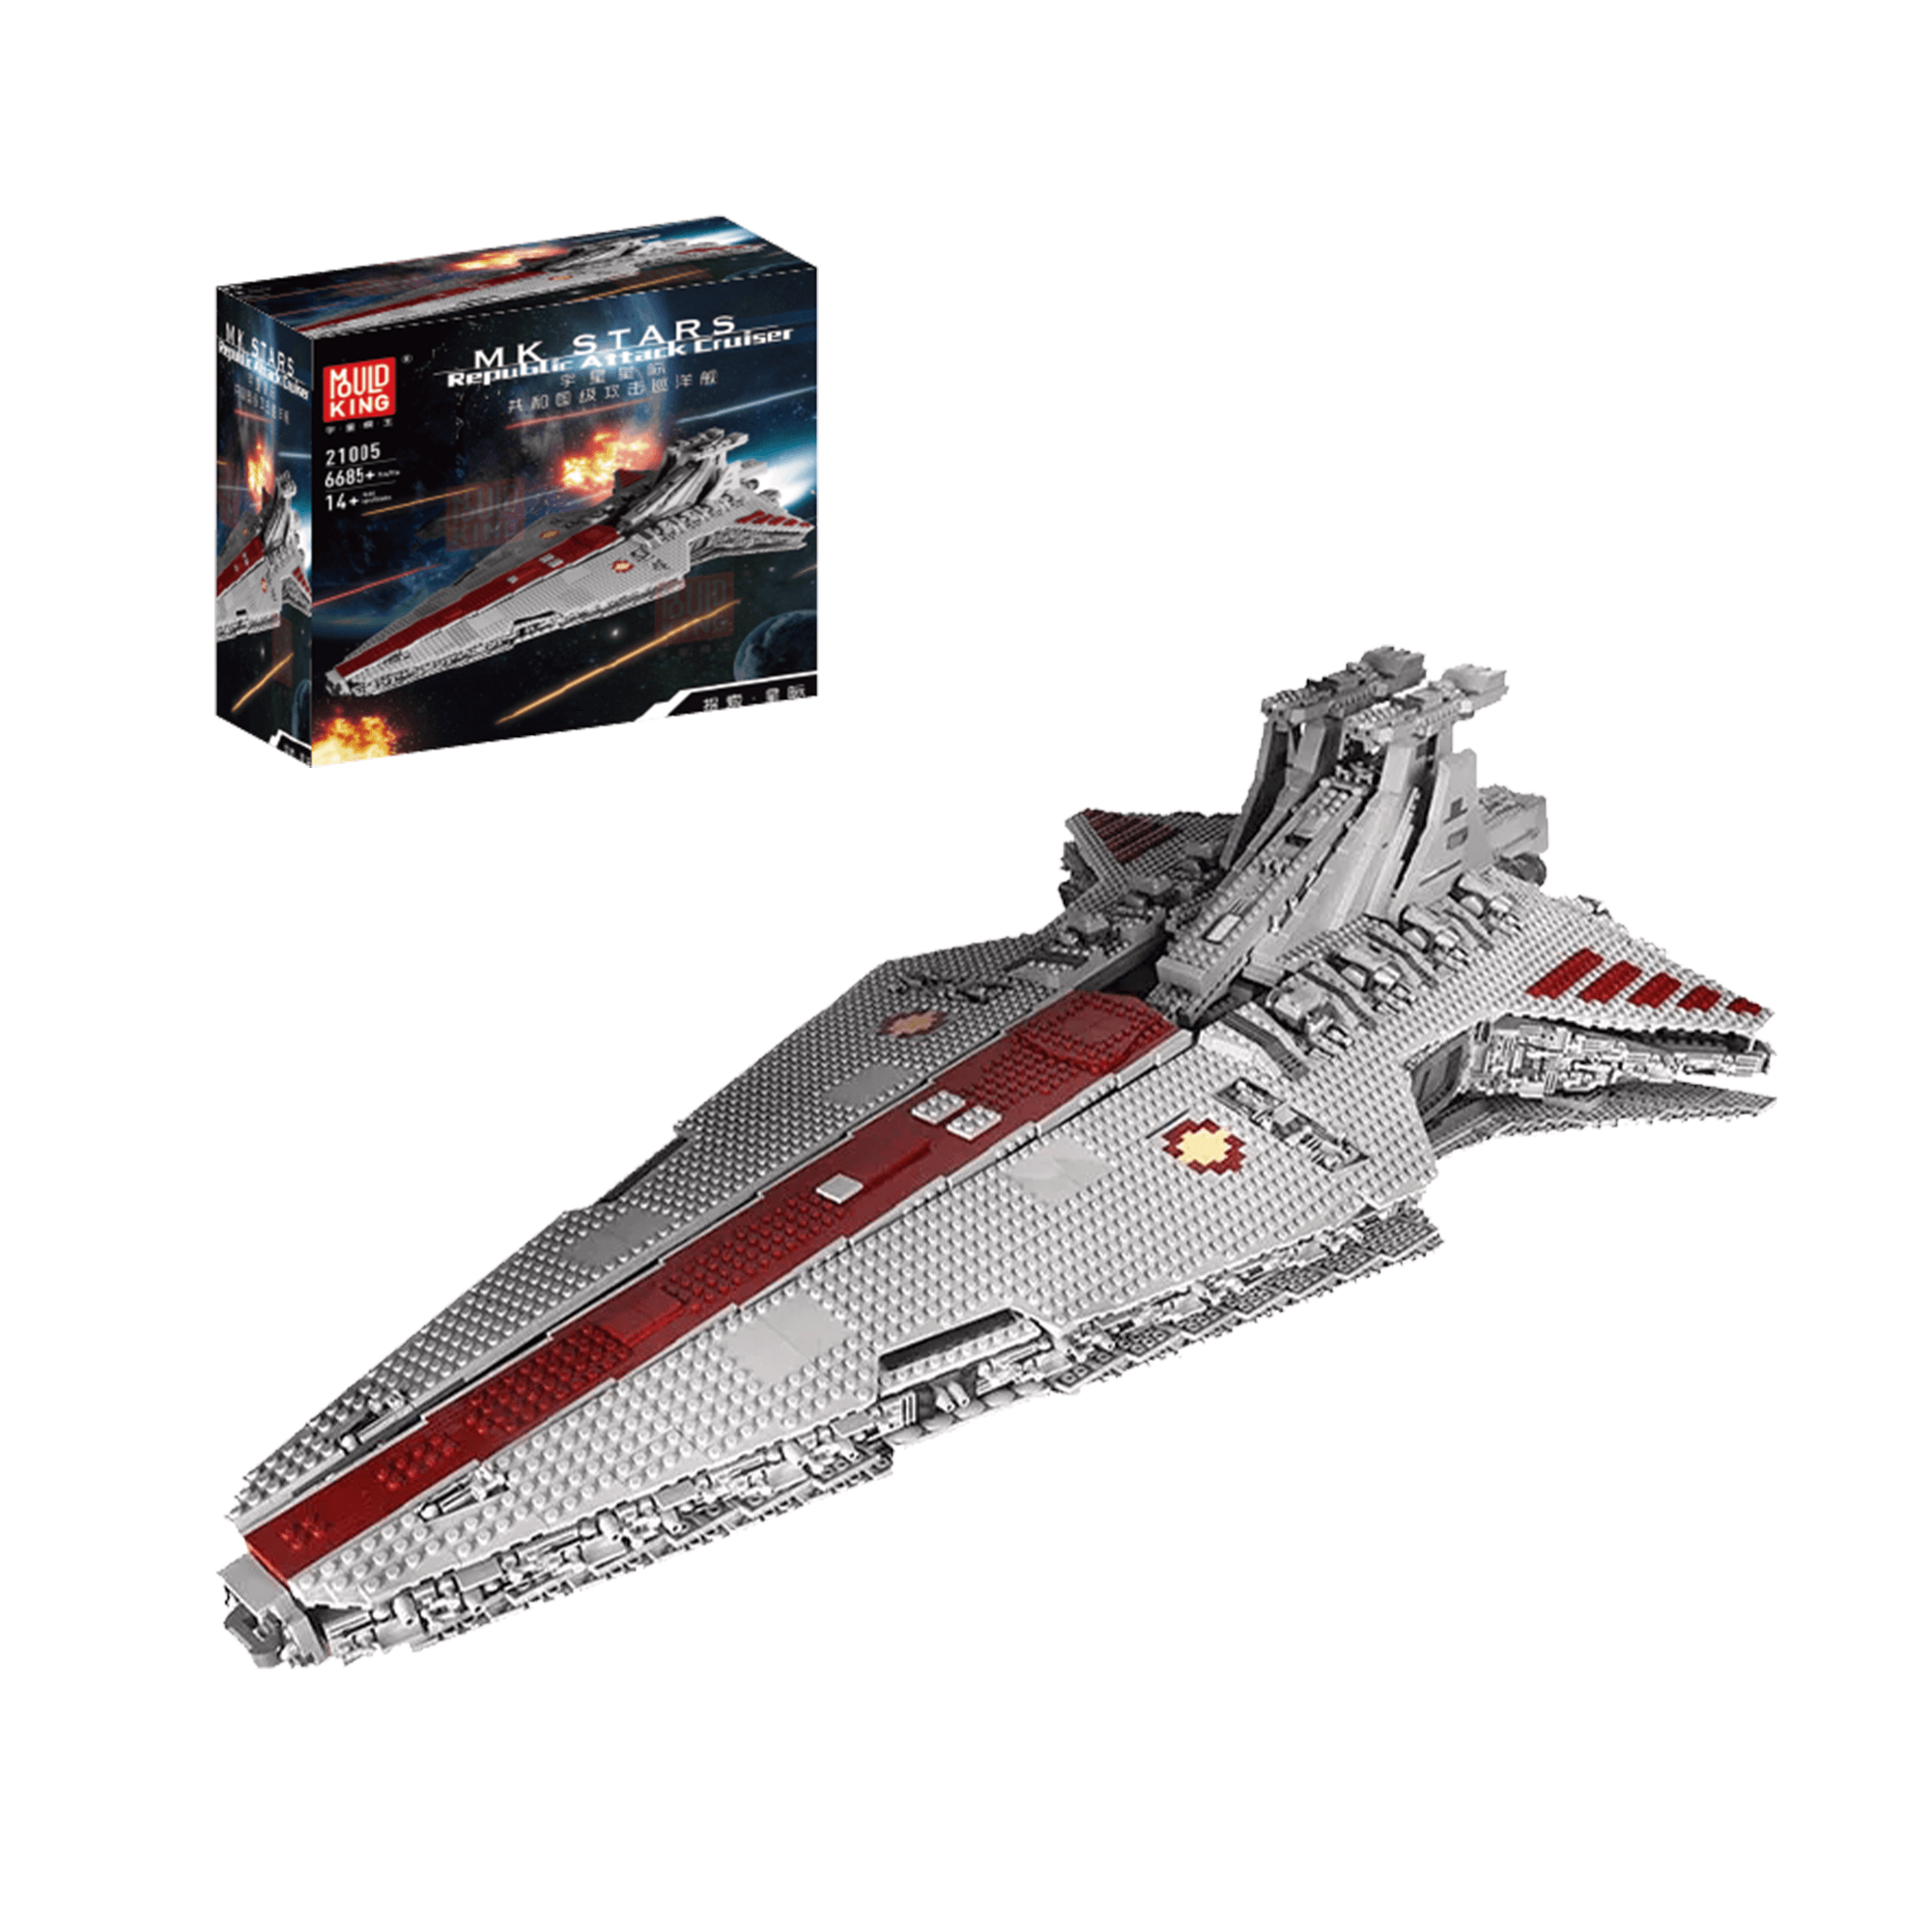 UCS Venator Republic Attack Cruiser Destroyer Building Blocks Set Back Mould  KING Star Plan Toy With MOC 0694 Assembly Bricks Perfect Birthday And  Christmas Gifts For Kids From Hjm9706, $266.54